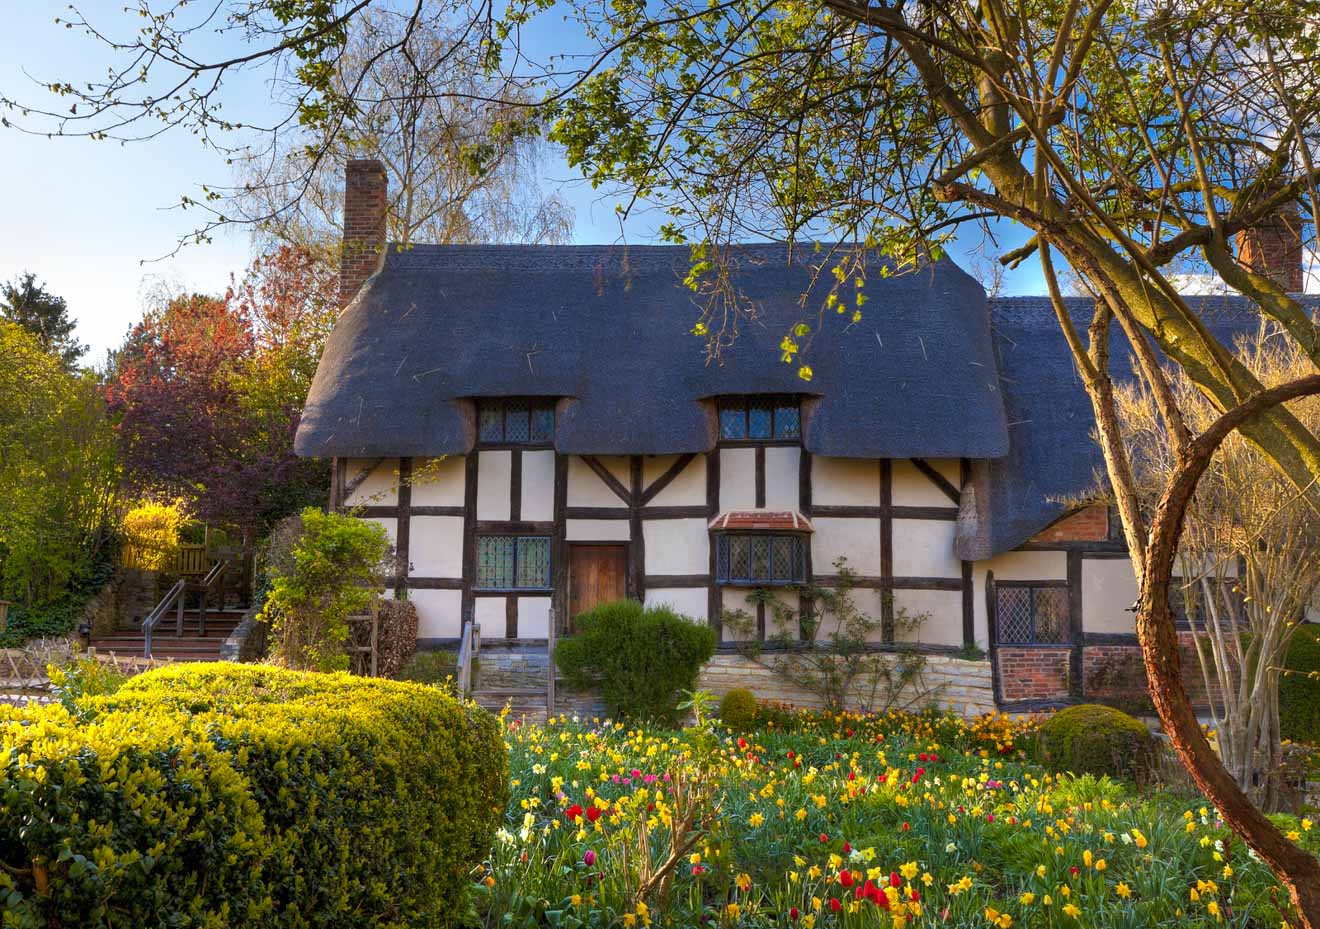 11 Best Things to do in Stratfod-Upon-Avon Anne Hathaway's Cottage